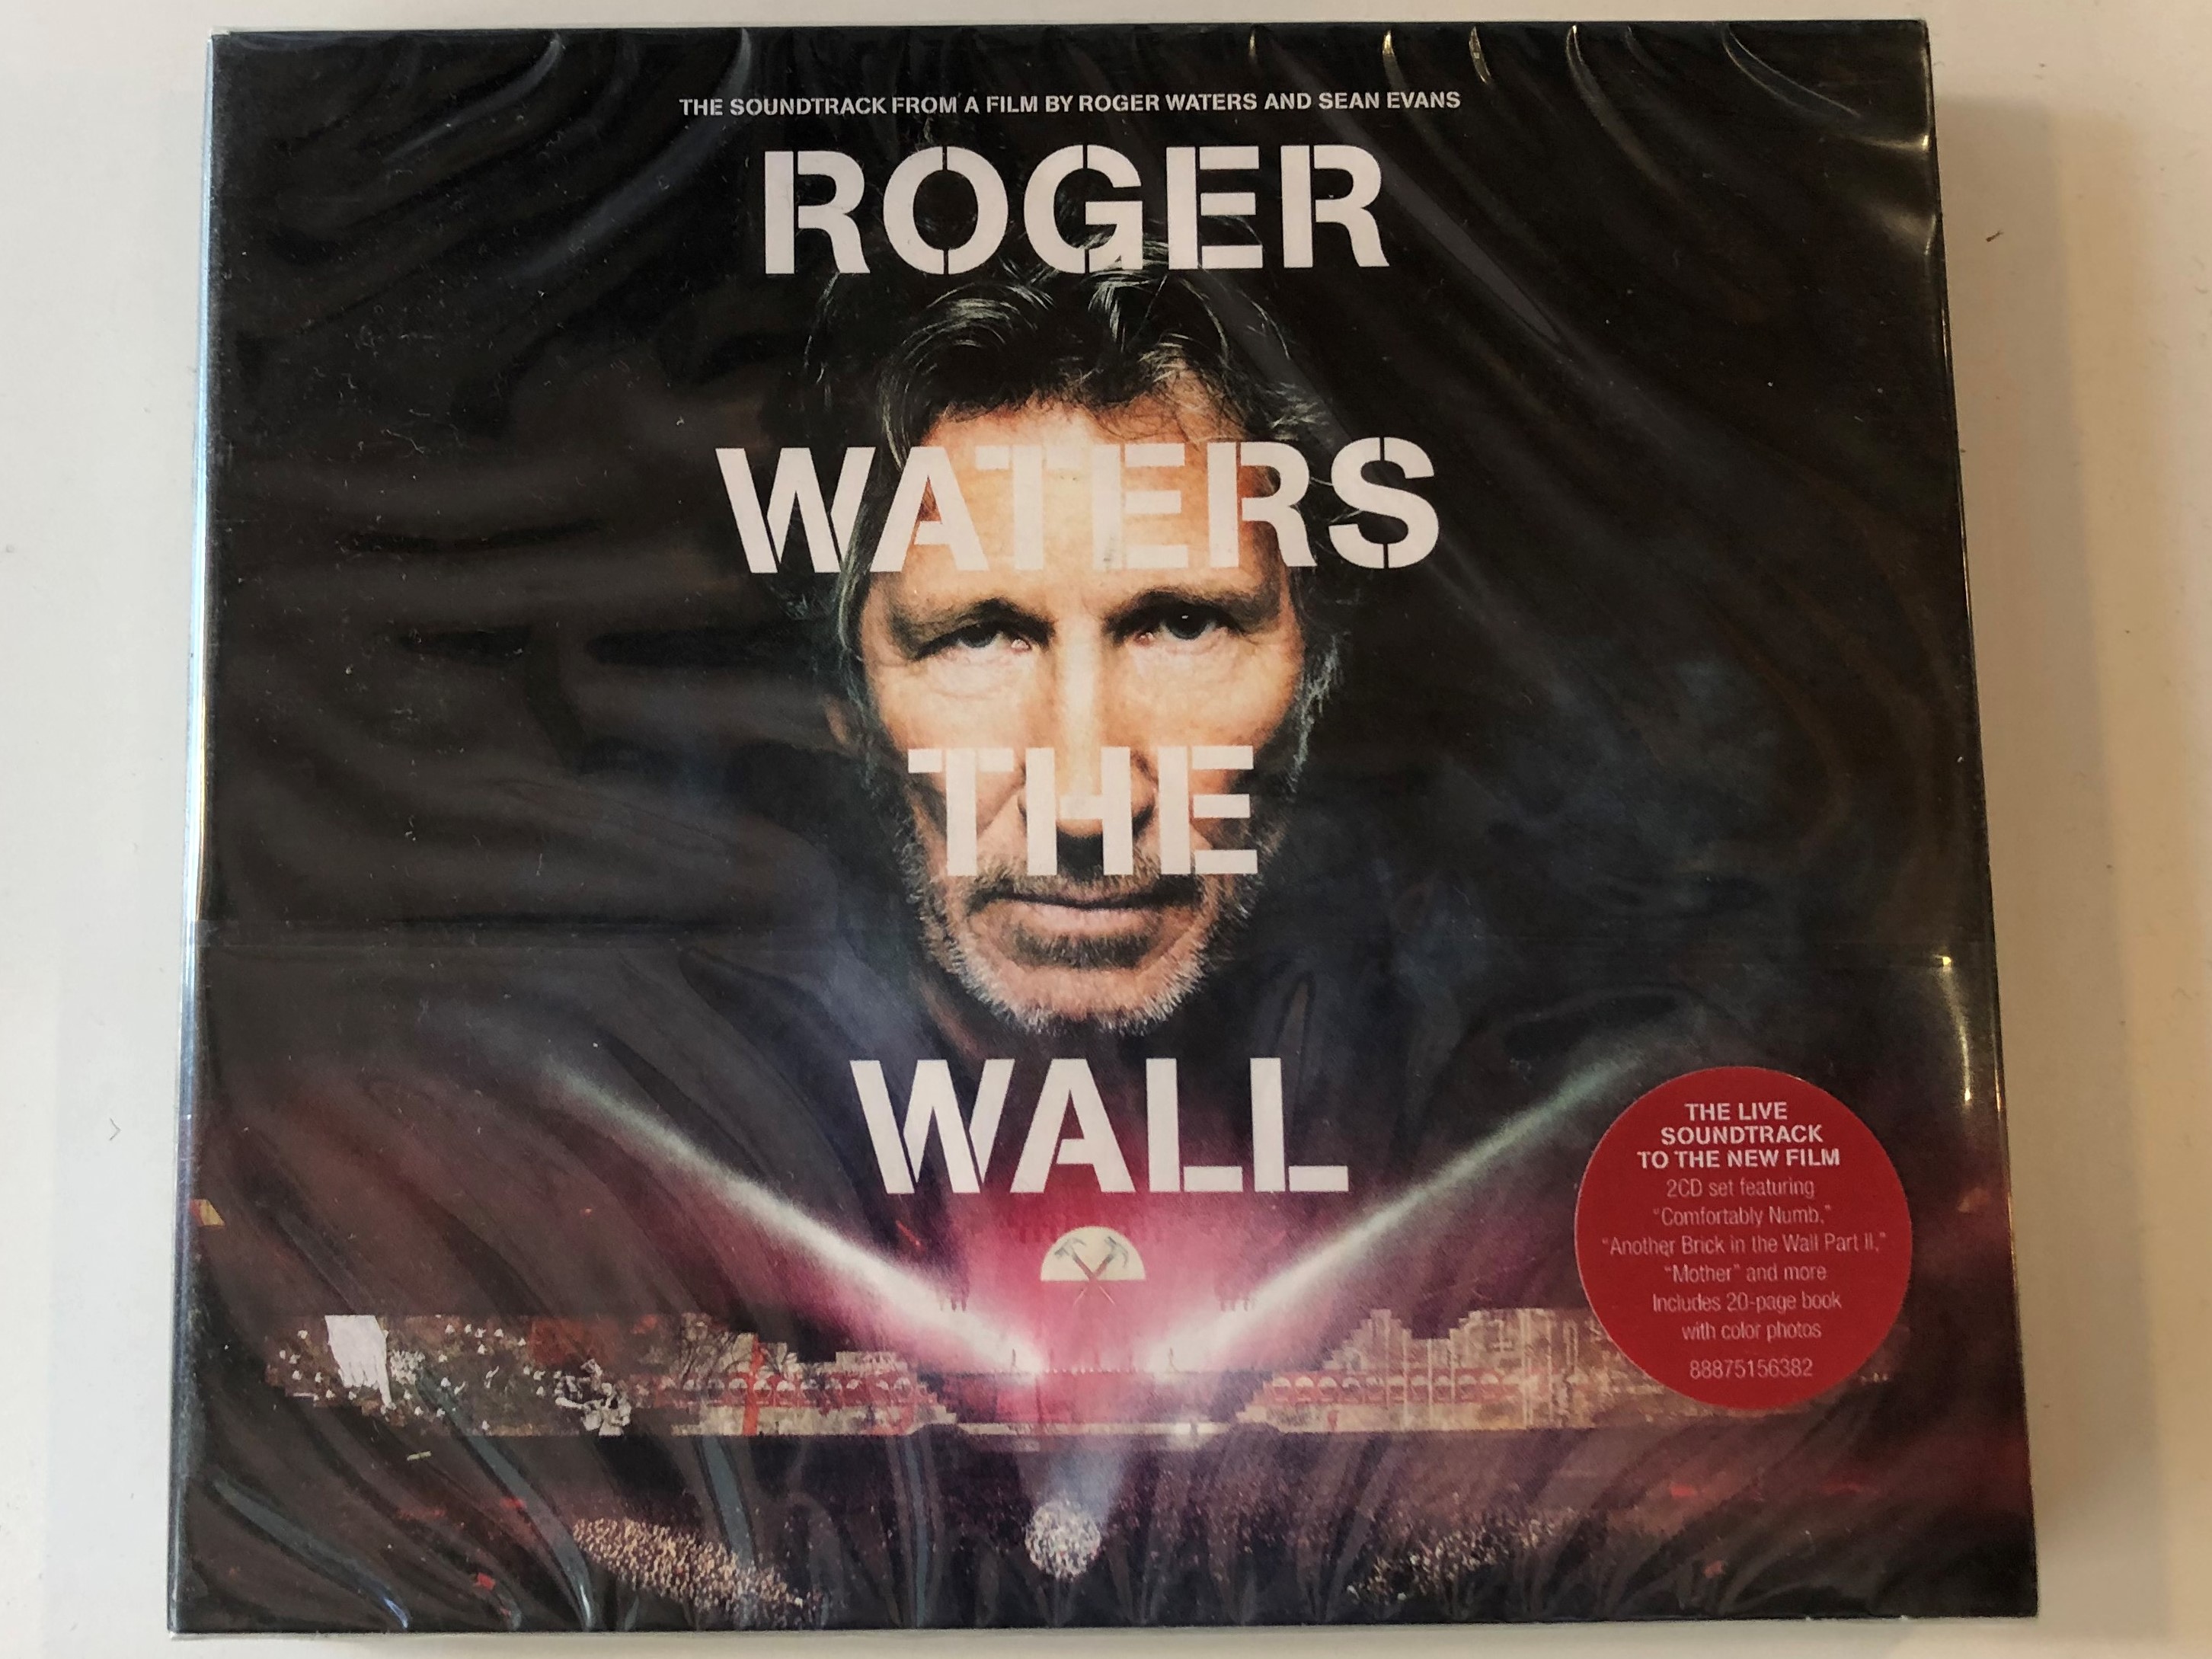 roger-waters-the-wall-the-soundtrack-from-a-film-by-roger-waters-and-sean-evans-2cd-set-featurinh-comfortably-numb-another-brick-in-the-wall-part-ii-mother-and-more-columbia-2x-1-.jpg